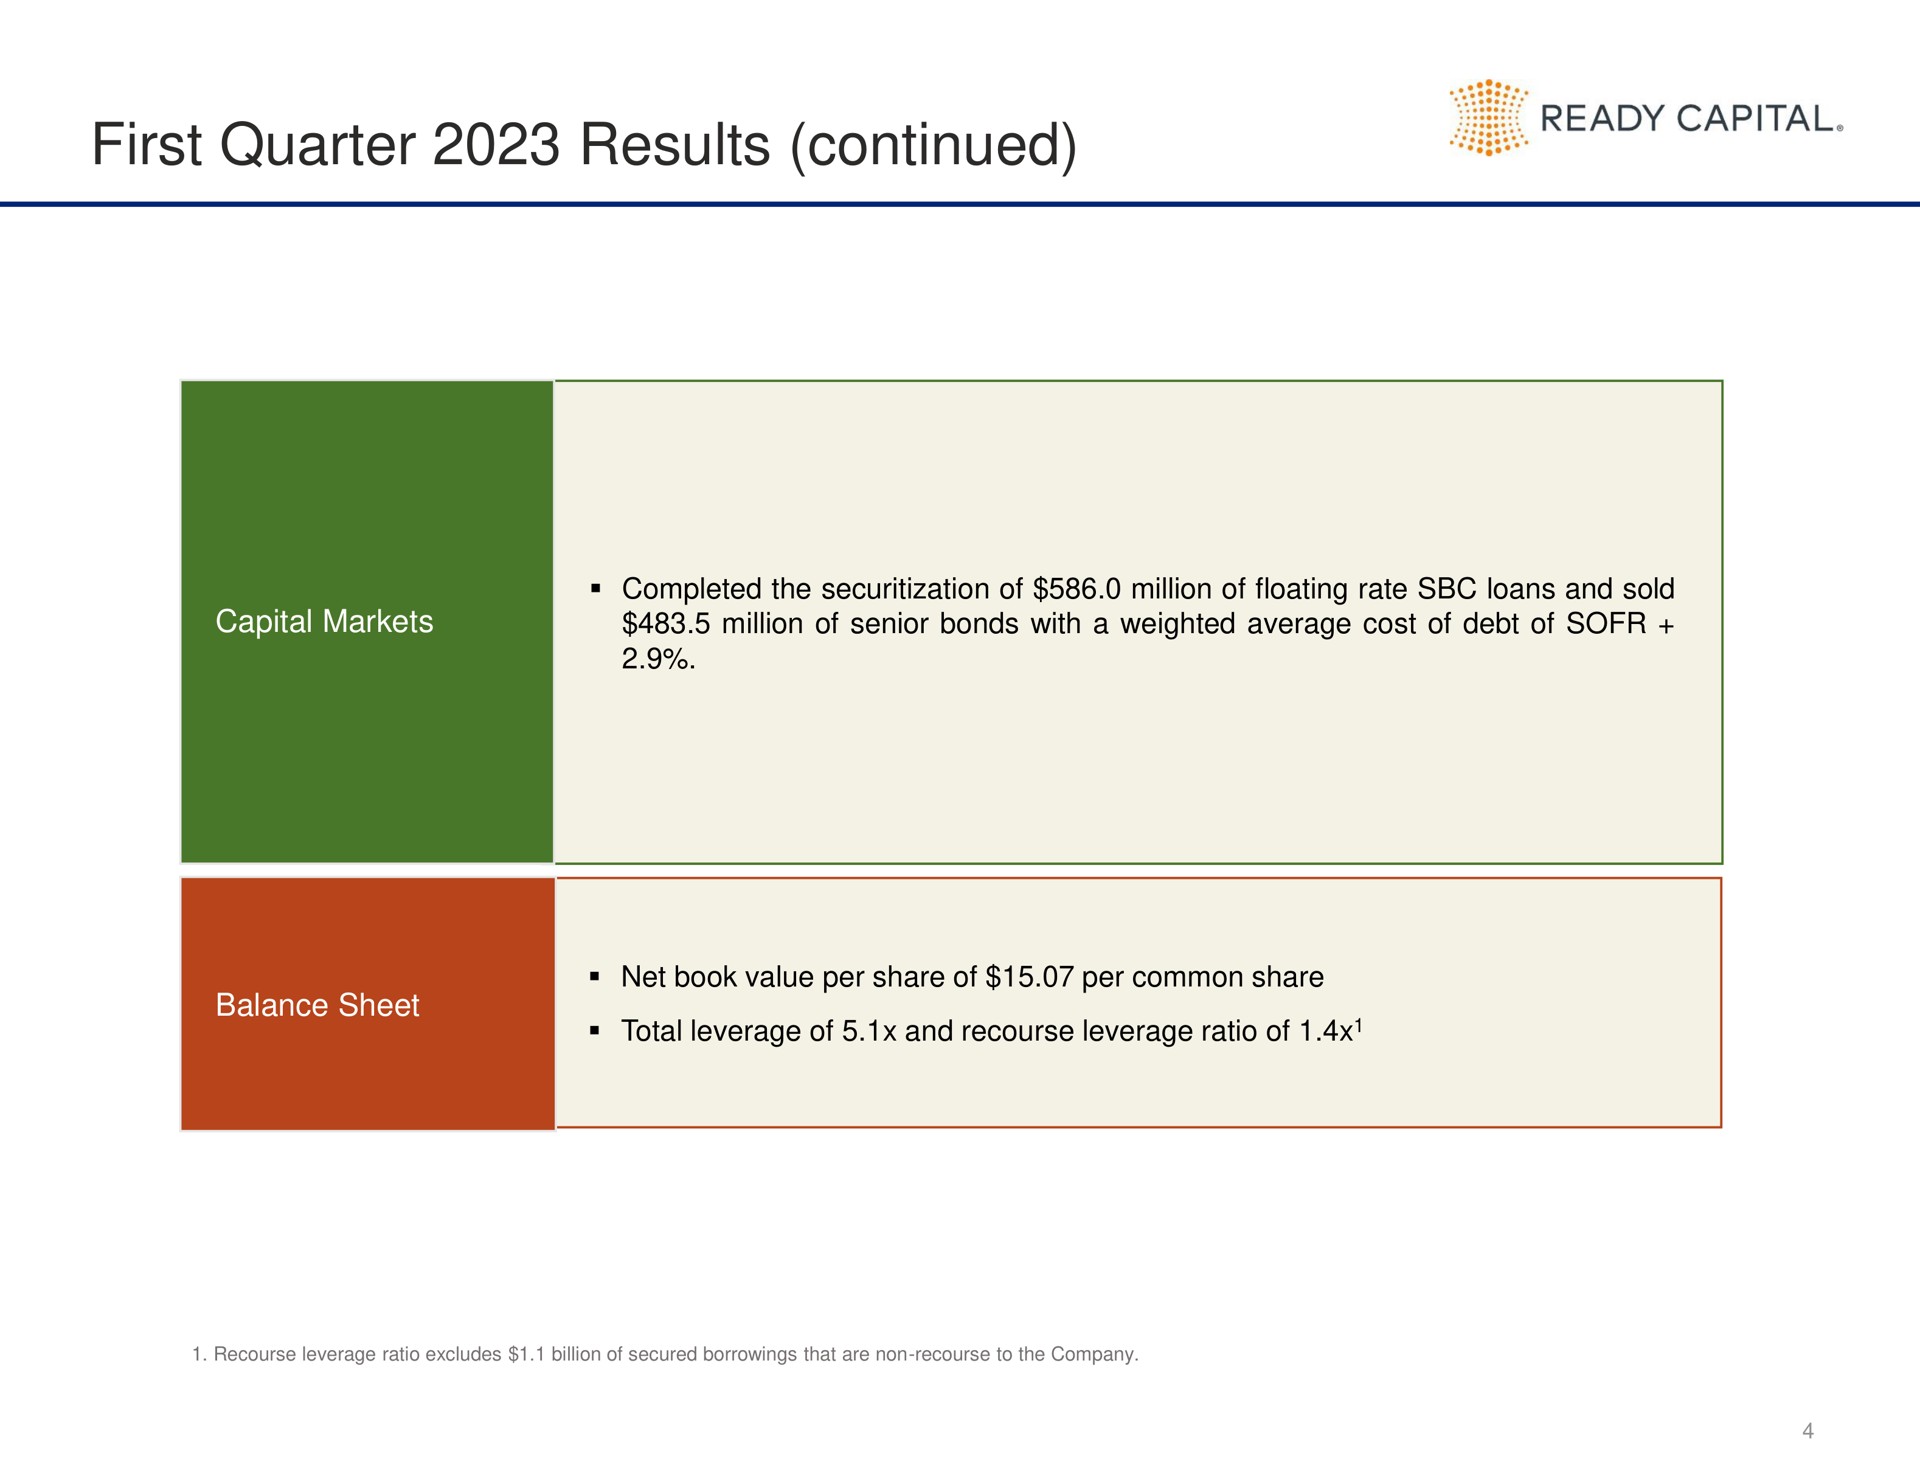 first quarter results continued ready capital | Ready Capital